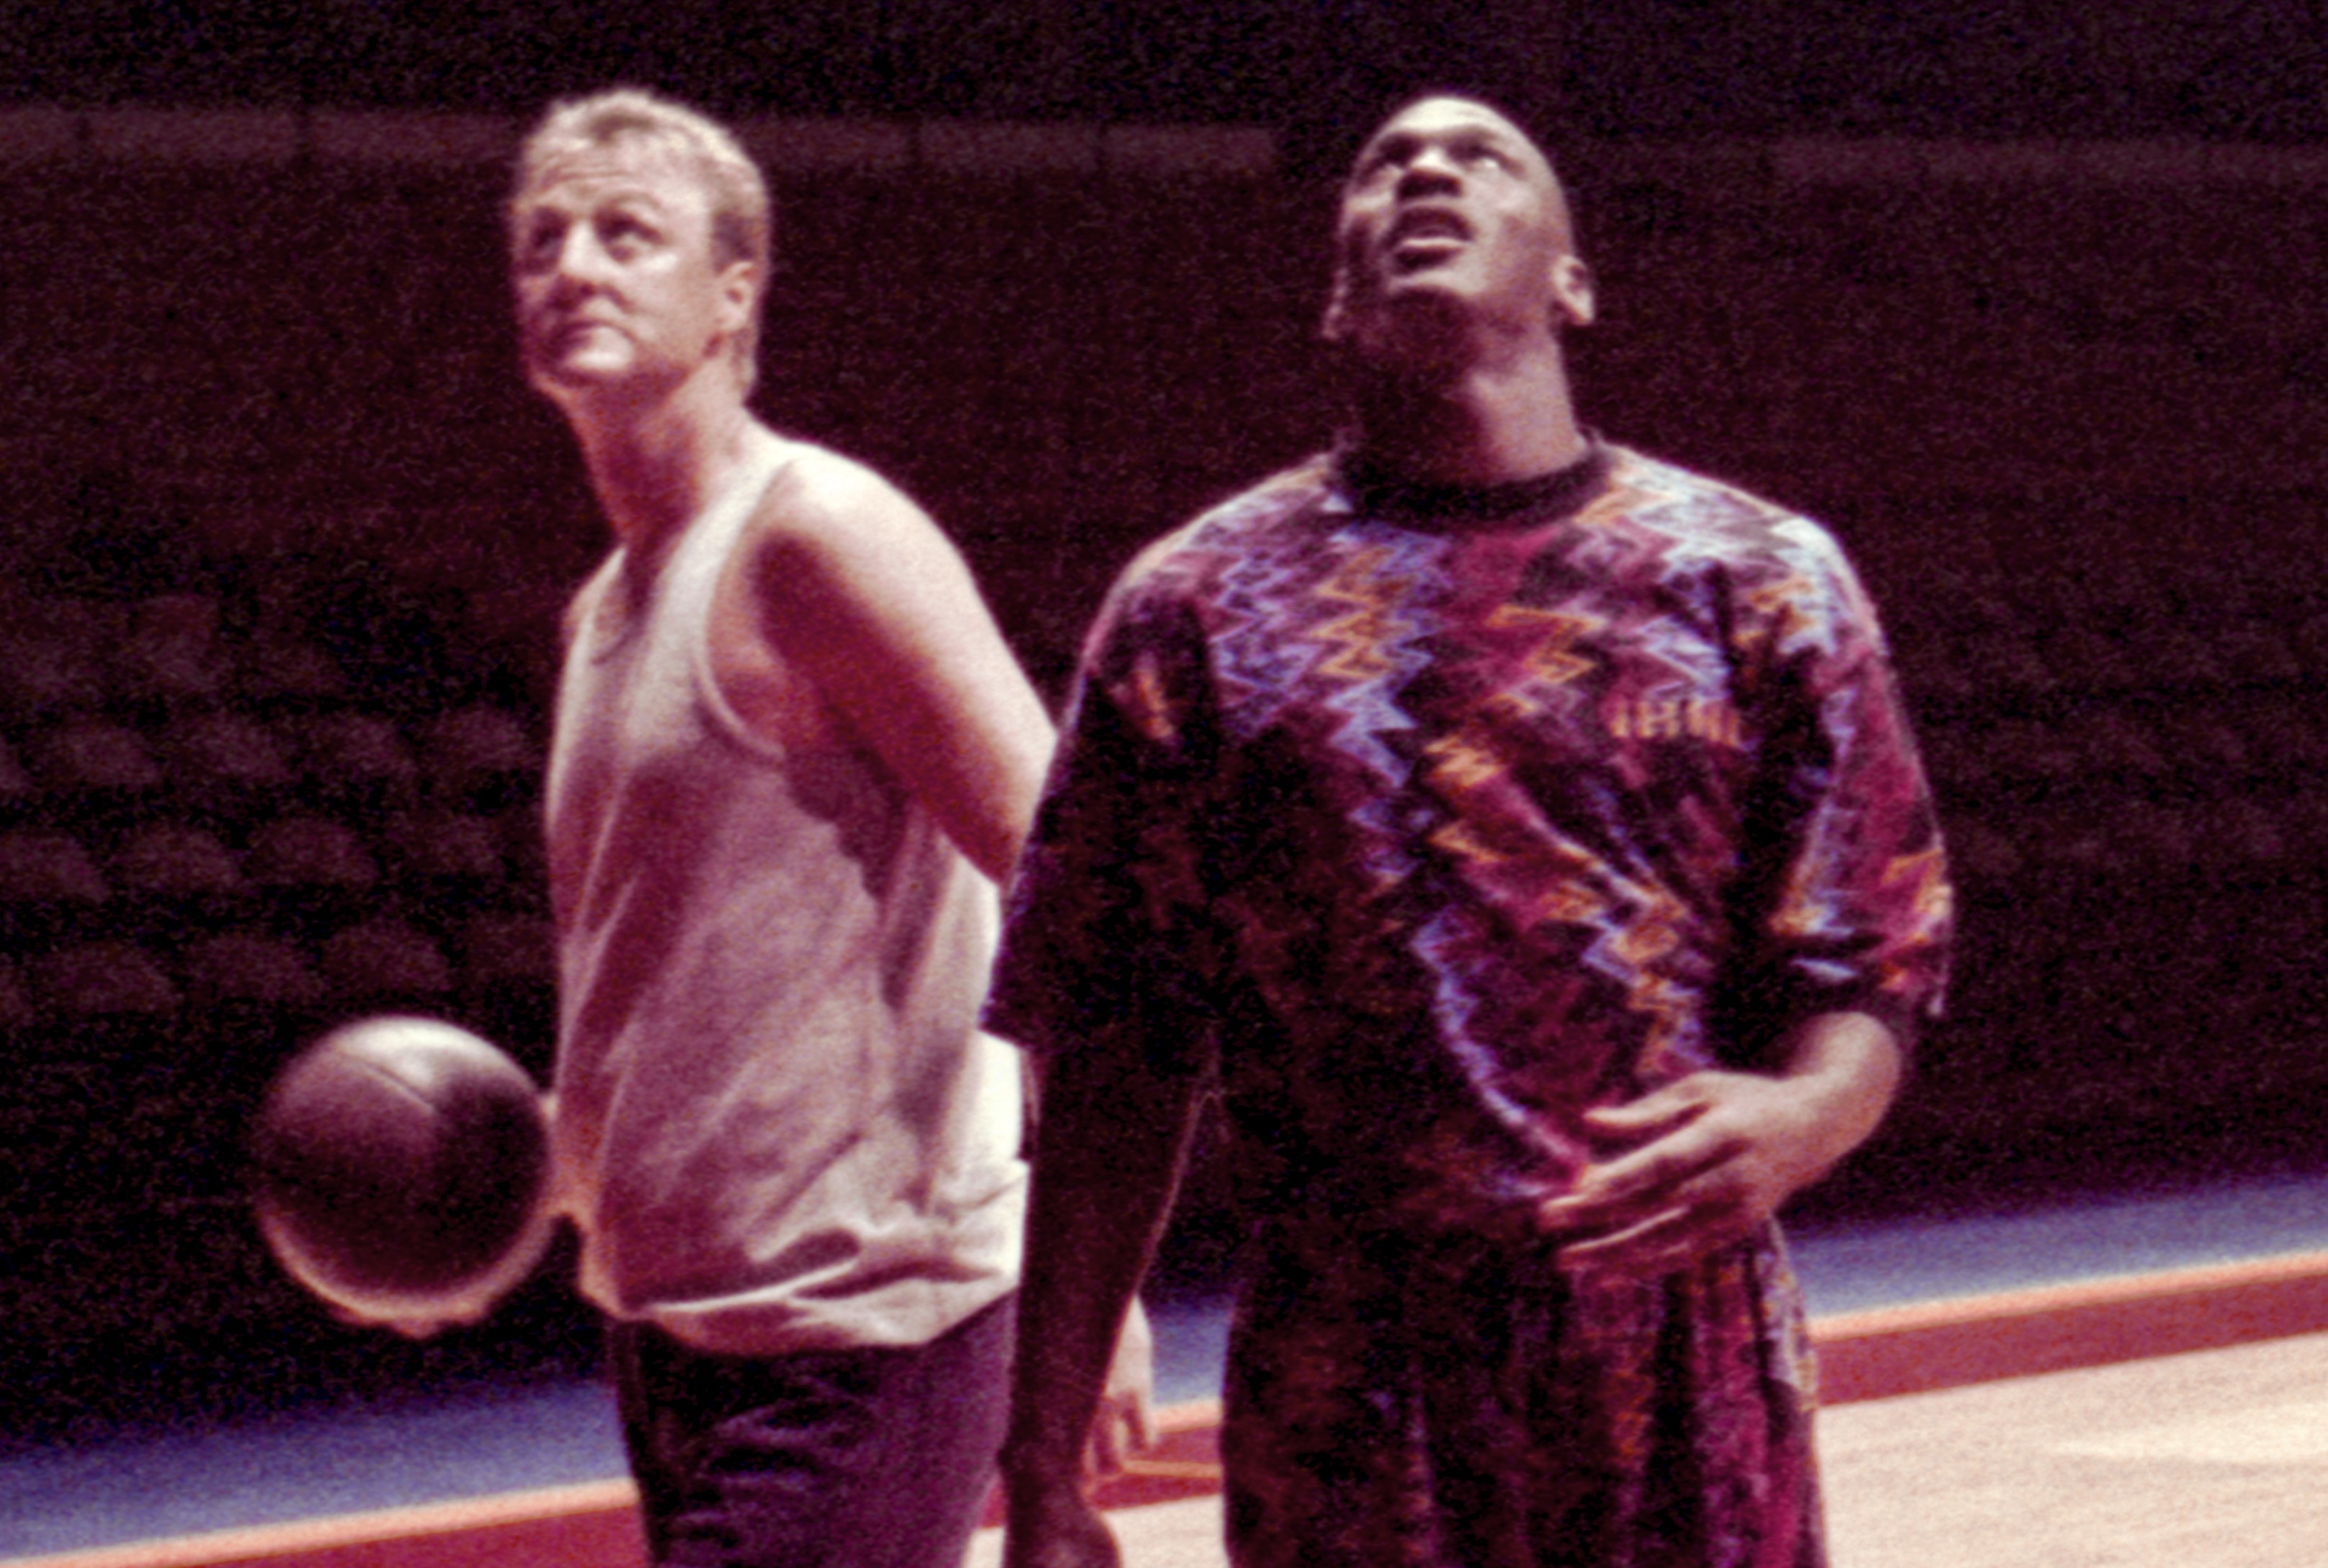 Larry Bird and Michael Jordan stand by to be filmed for a McDonald's "Nothing But Net" television commercial.